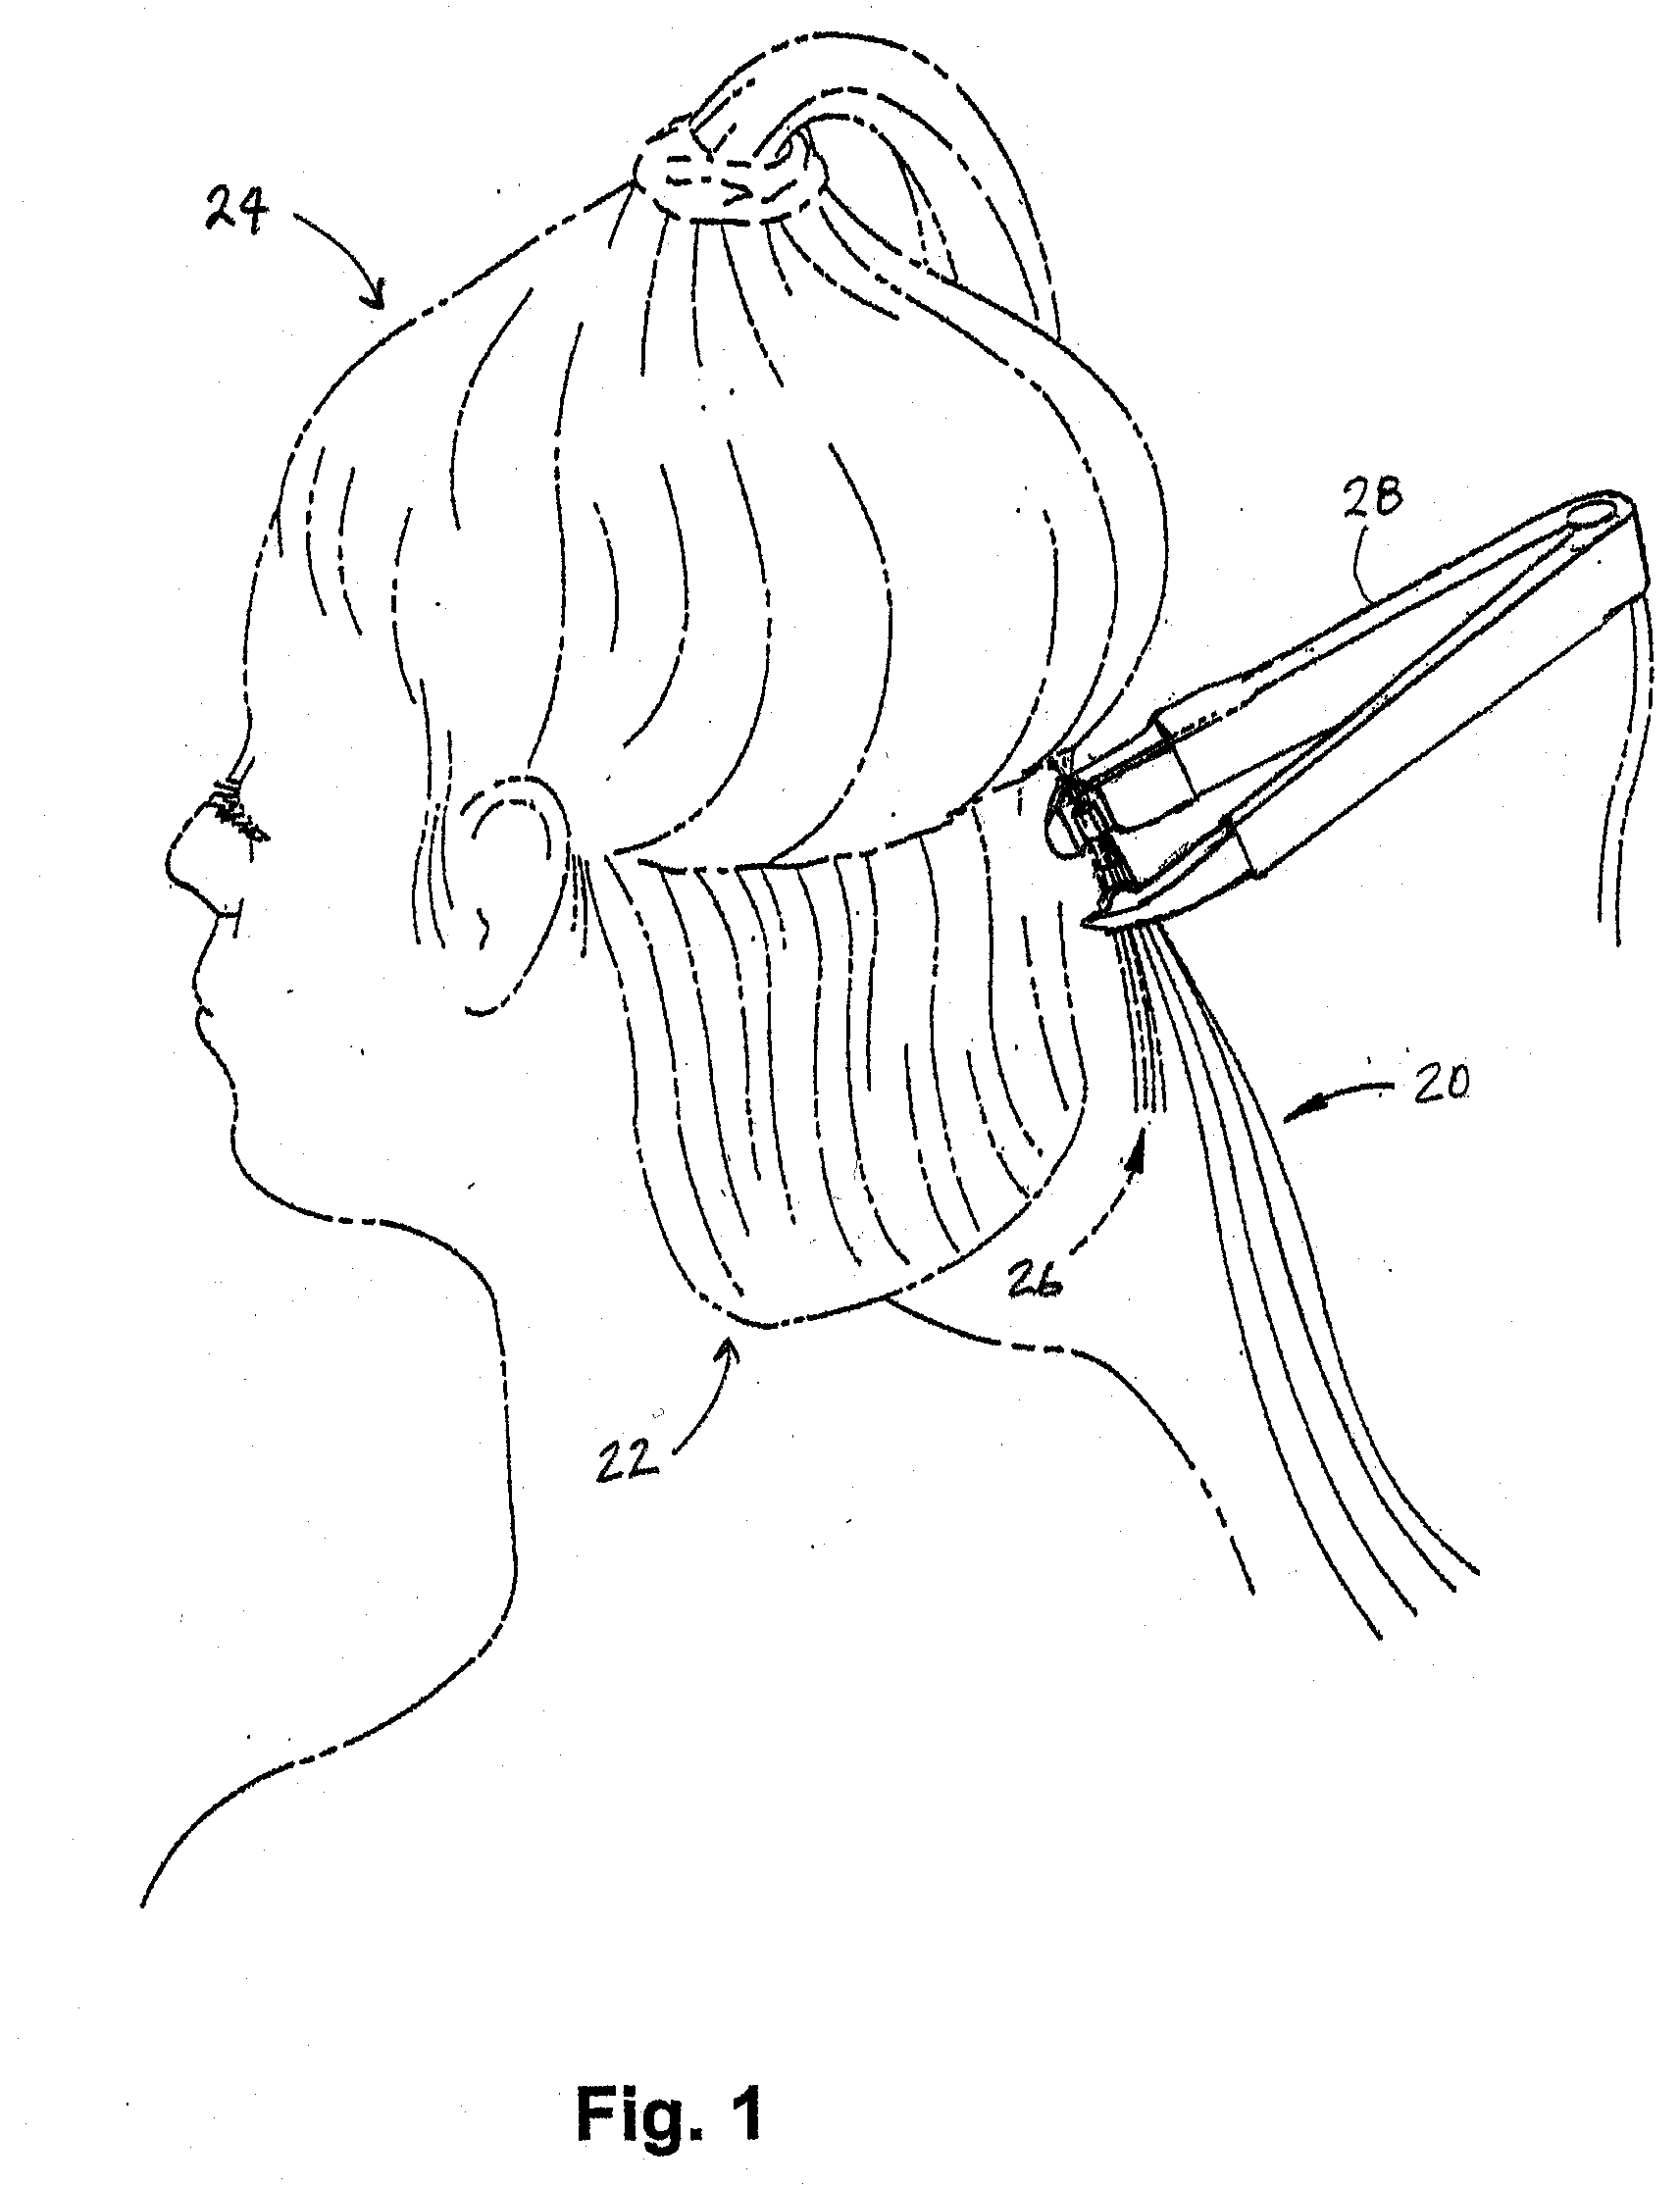 Method and apparatus for attaching supplemental hair to human hair